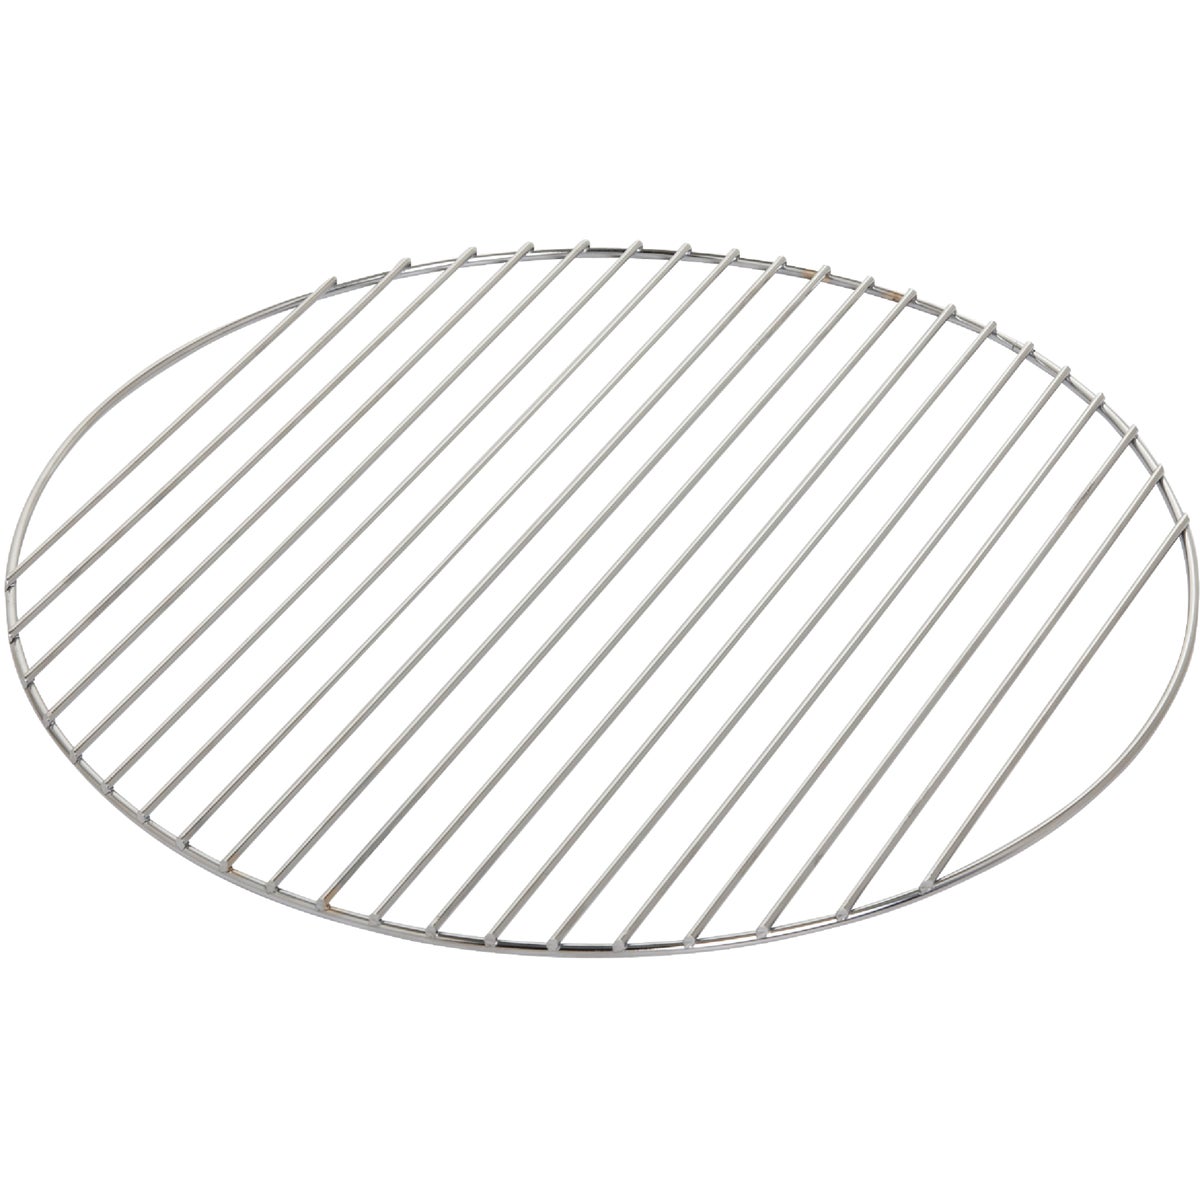 Old Smokey 17 In. Aluminized Steel Top Grill Grate